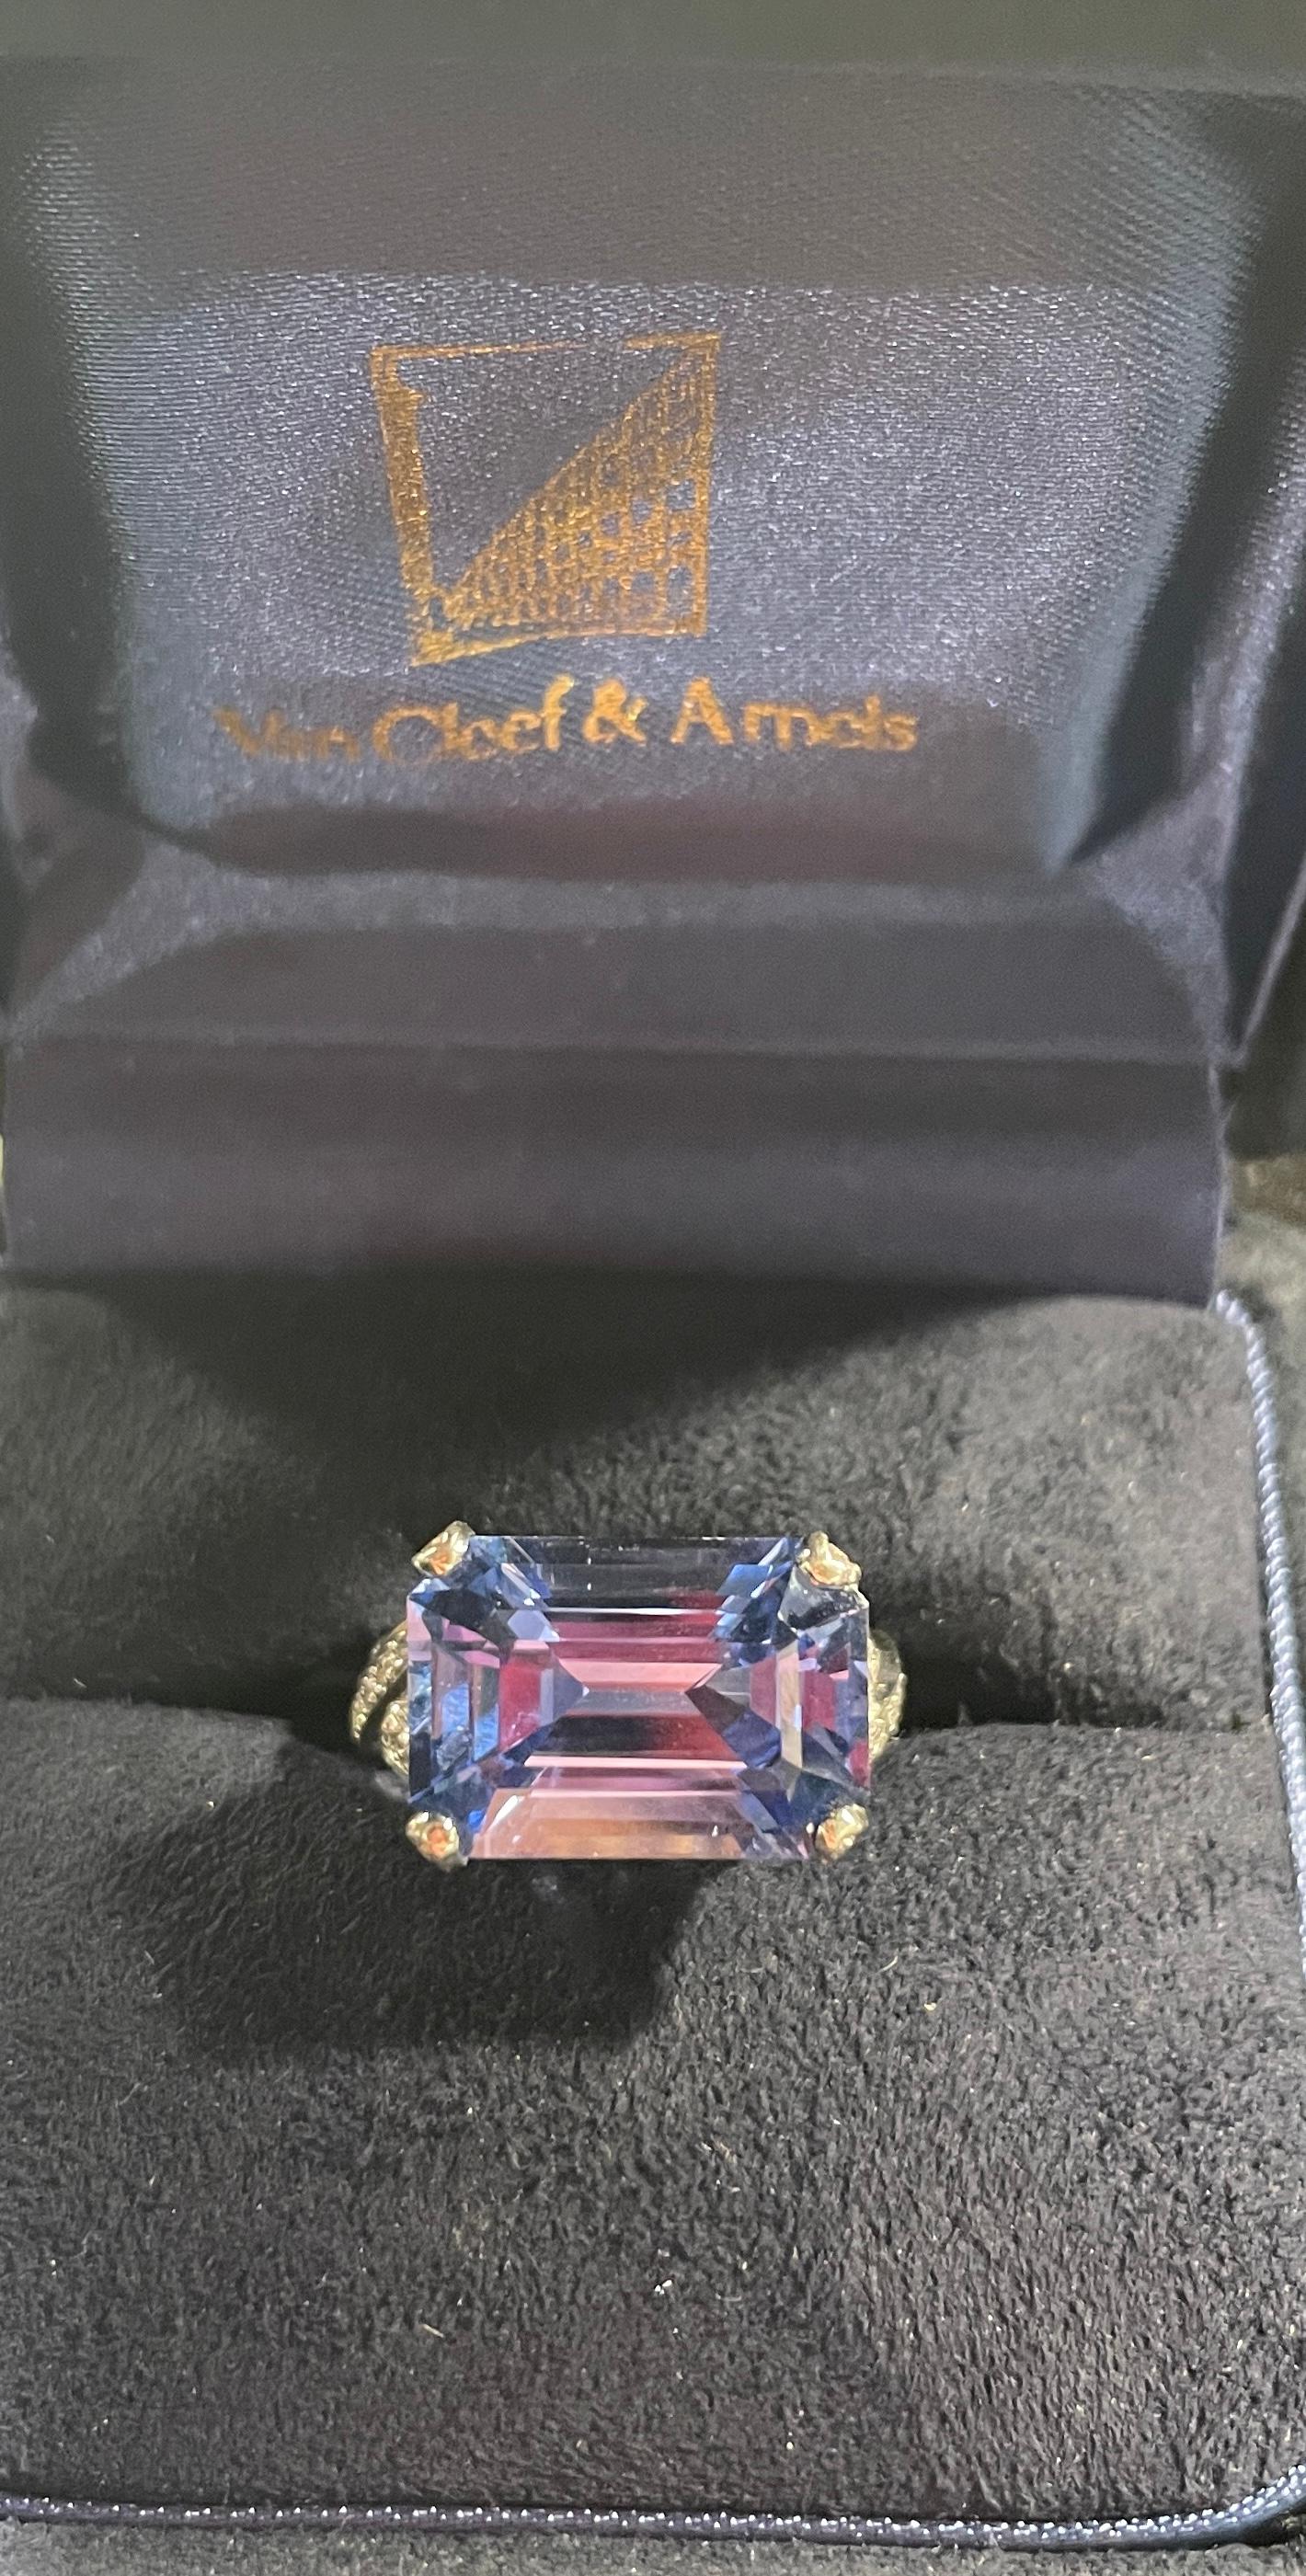 HK Fine Estate Jewels is thrilled to present this one of a kind Van Cleef & Arpels east west set sapphire ring. This hand crafted masterpiece features sapphire weighing 10.15 carats carefully set in a horizontal position with the open work shoulders